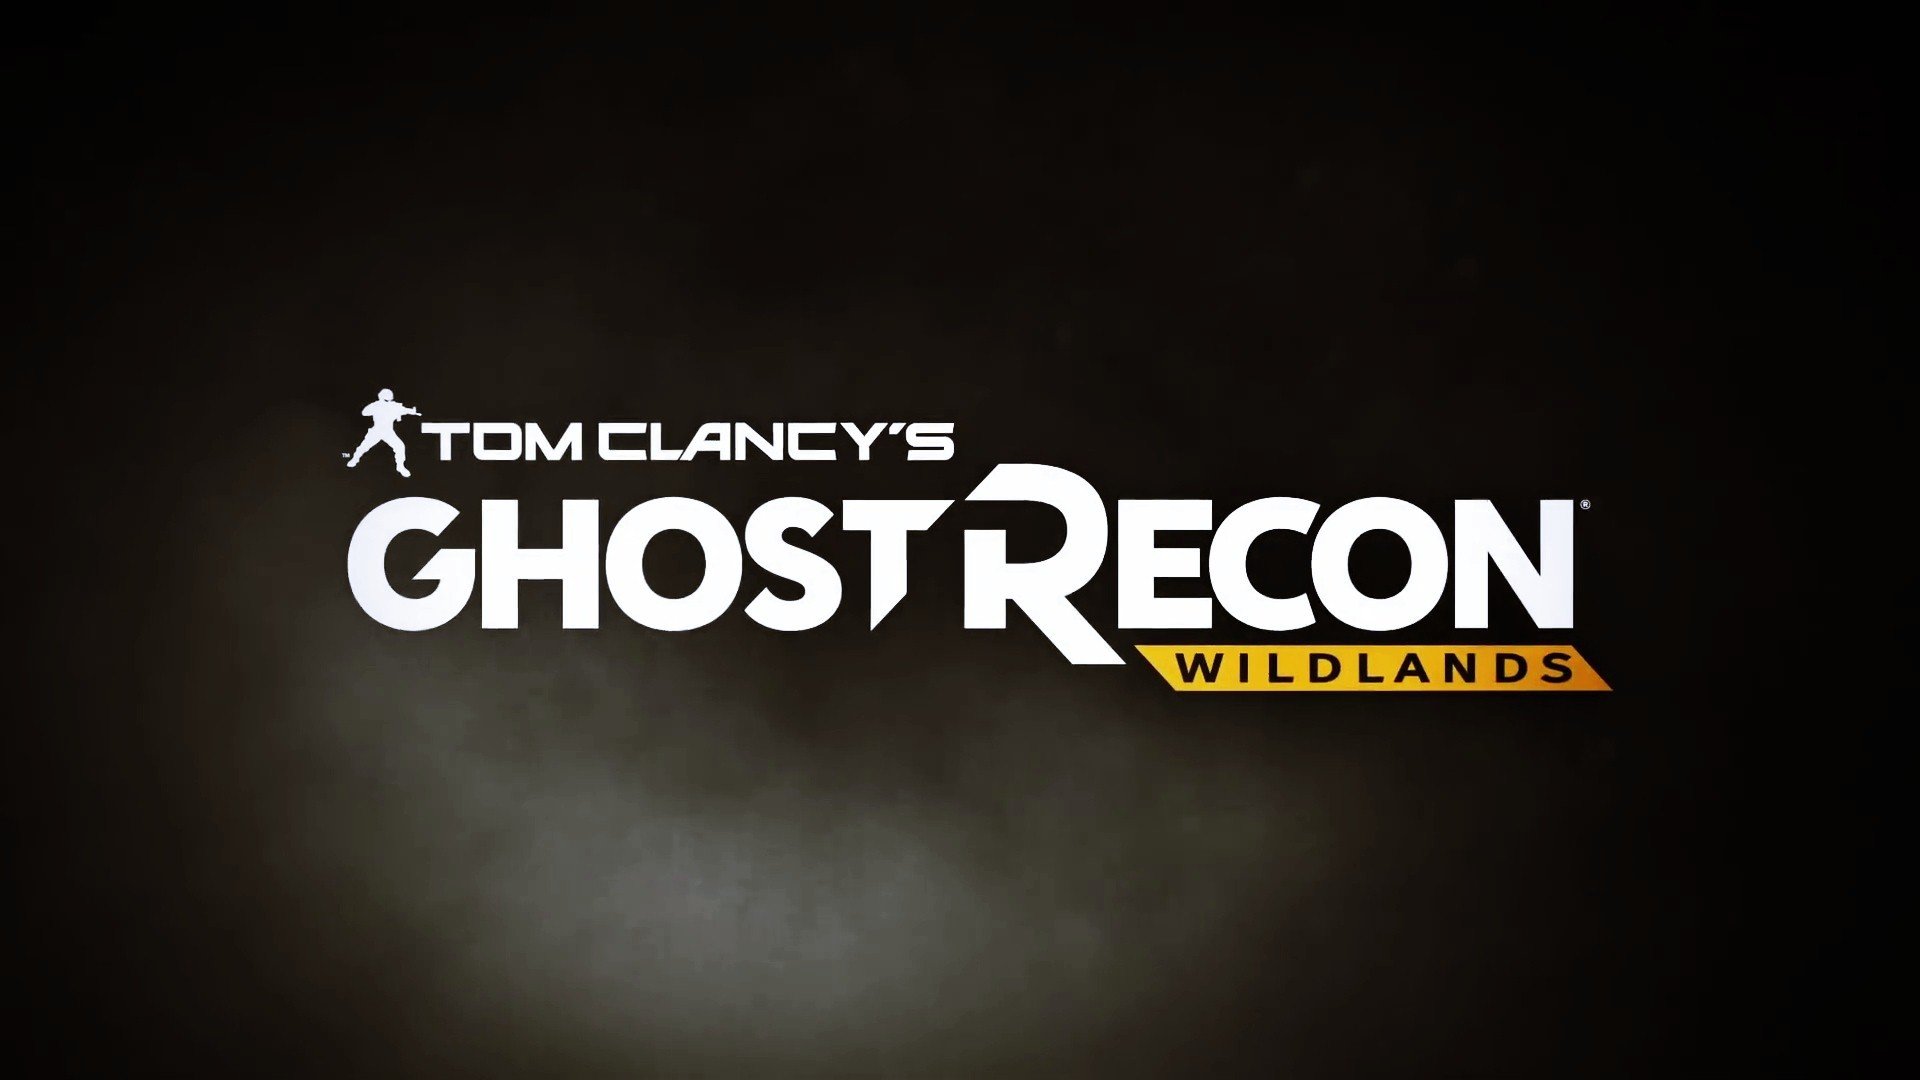 Download full hd 1080p Tom Clancy's Ghost Recon Wildlands computer background ID:62470 for free